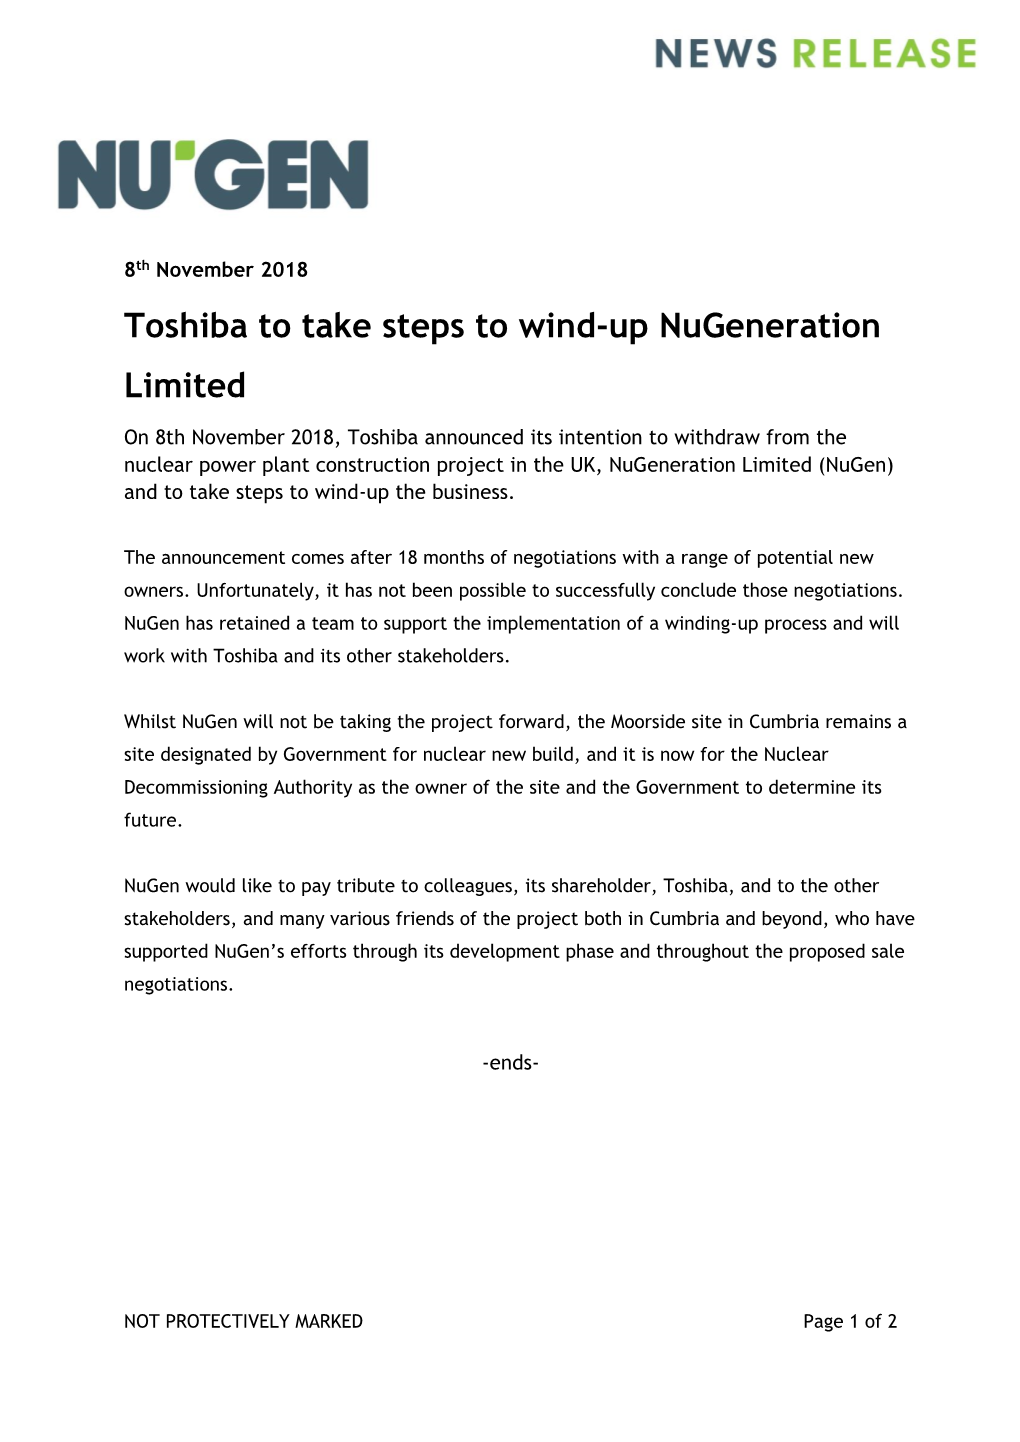 Toshiba to Take Steps to Wind-Up Nugeneration Limited